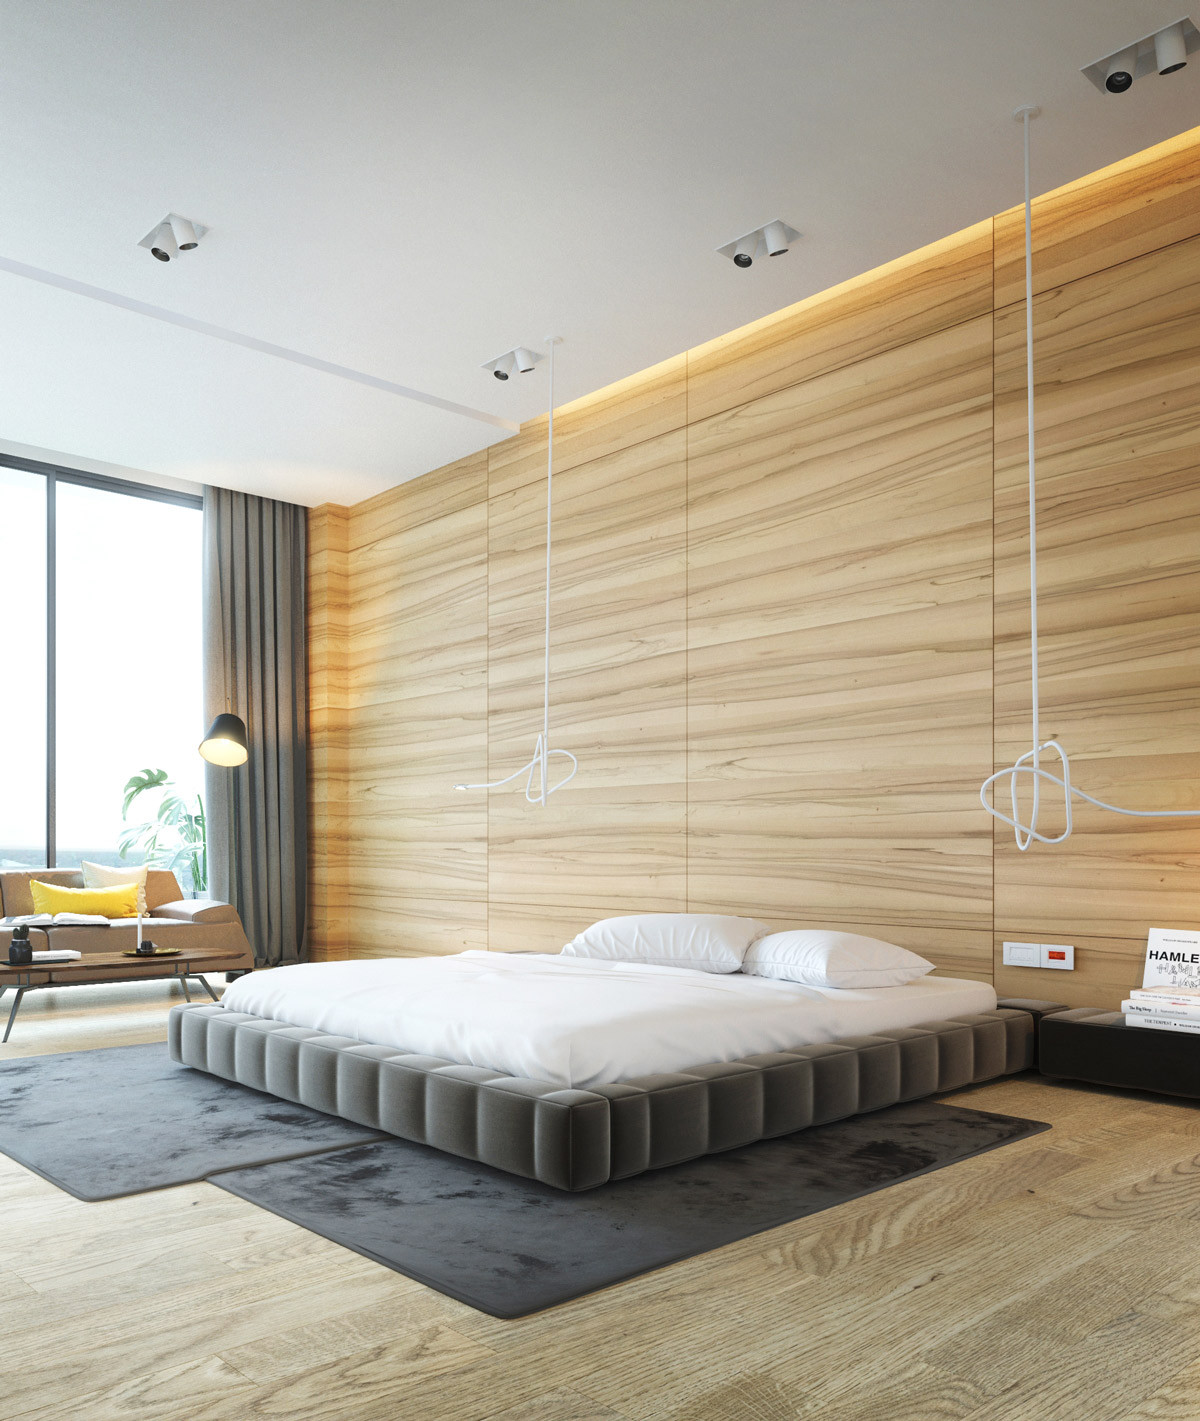 Wooden Wall In Bedroom
 Wooden Wall Designs 30 Striking Bedrooms That Use The